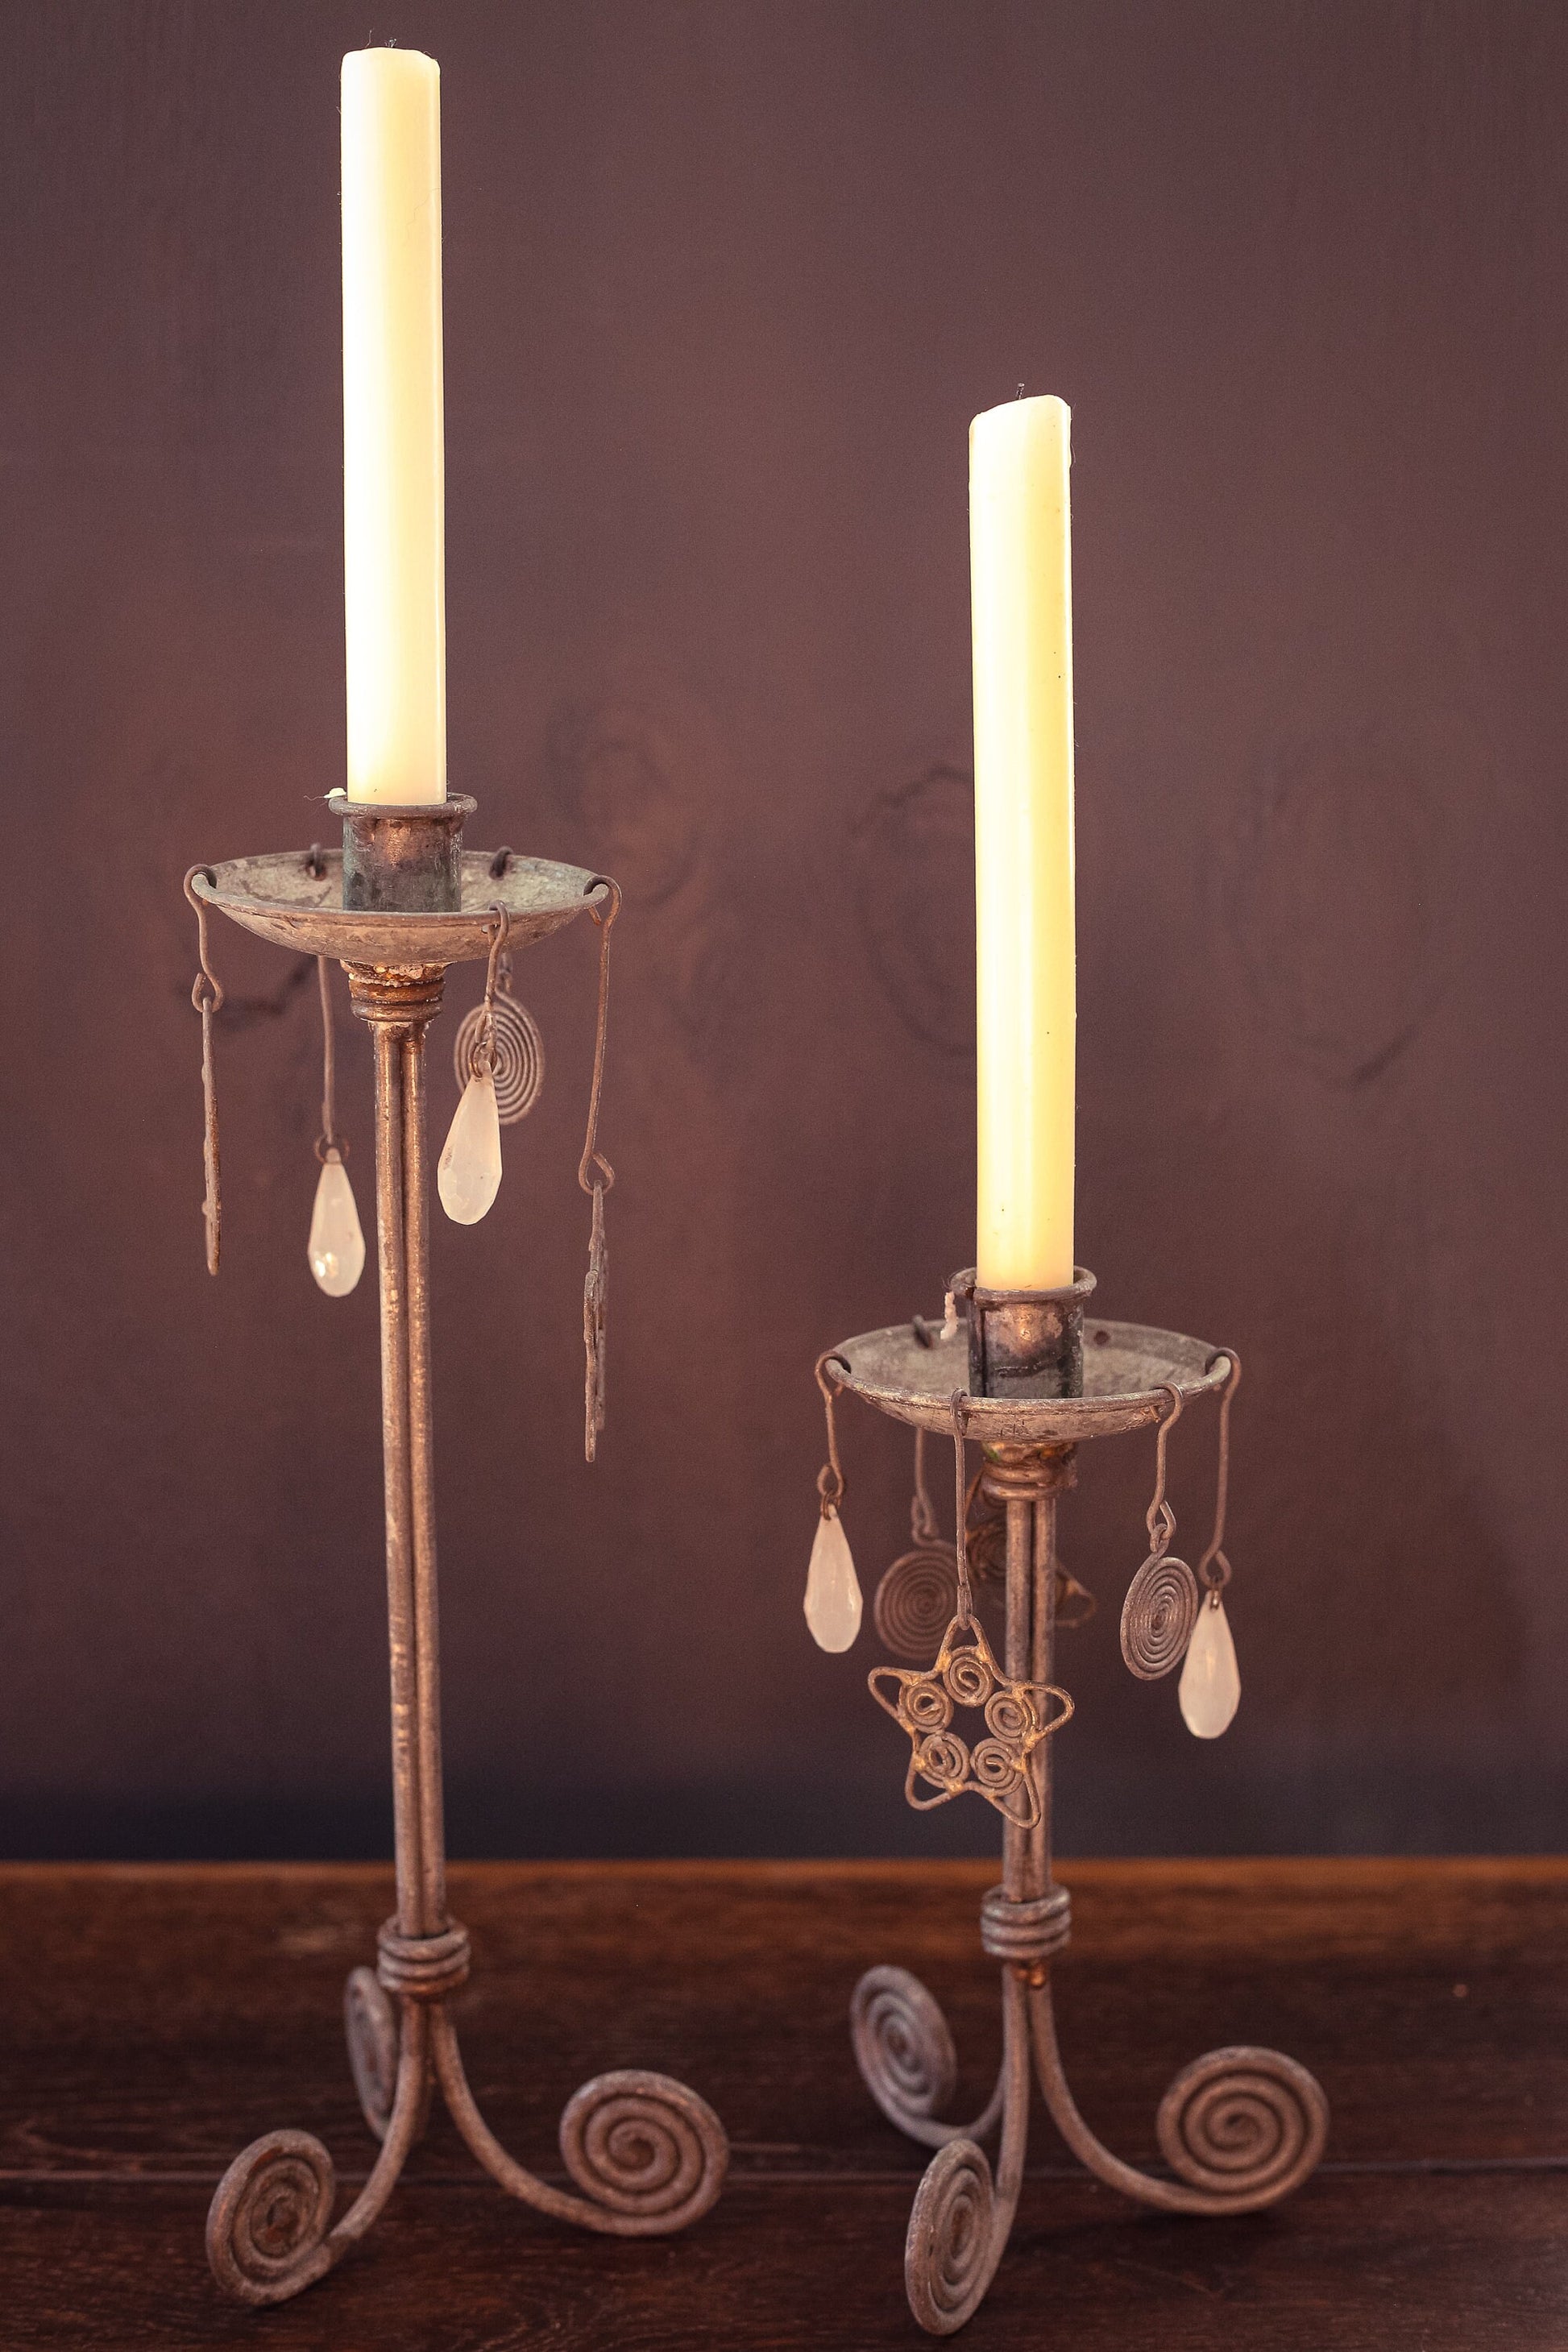 Moon & Stars Galvanized Aluminum Candle Holders with Crystals - Vintage Pair of Rustic Celestial Candle Base